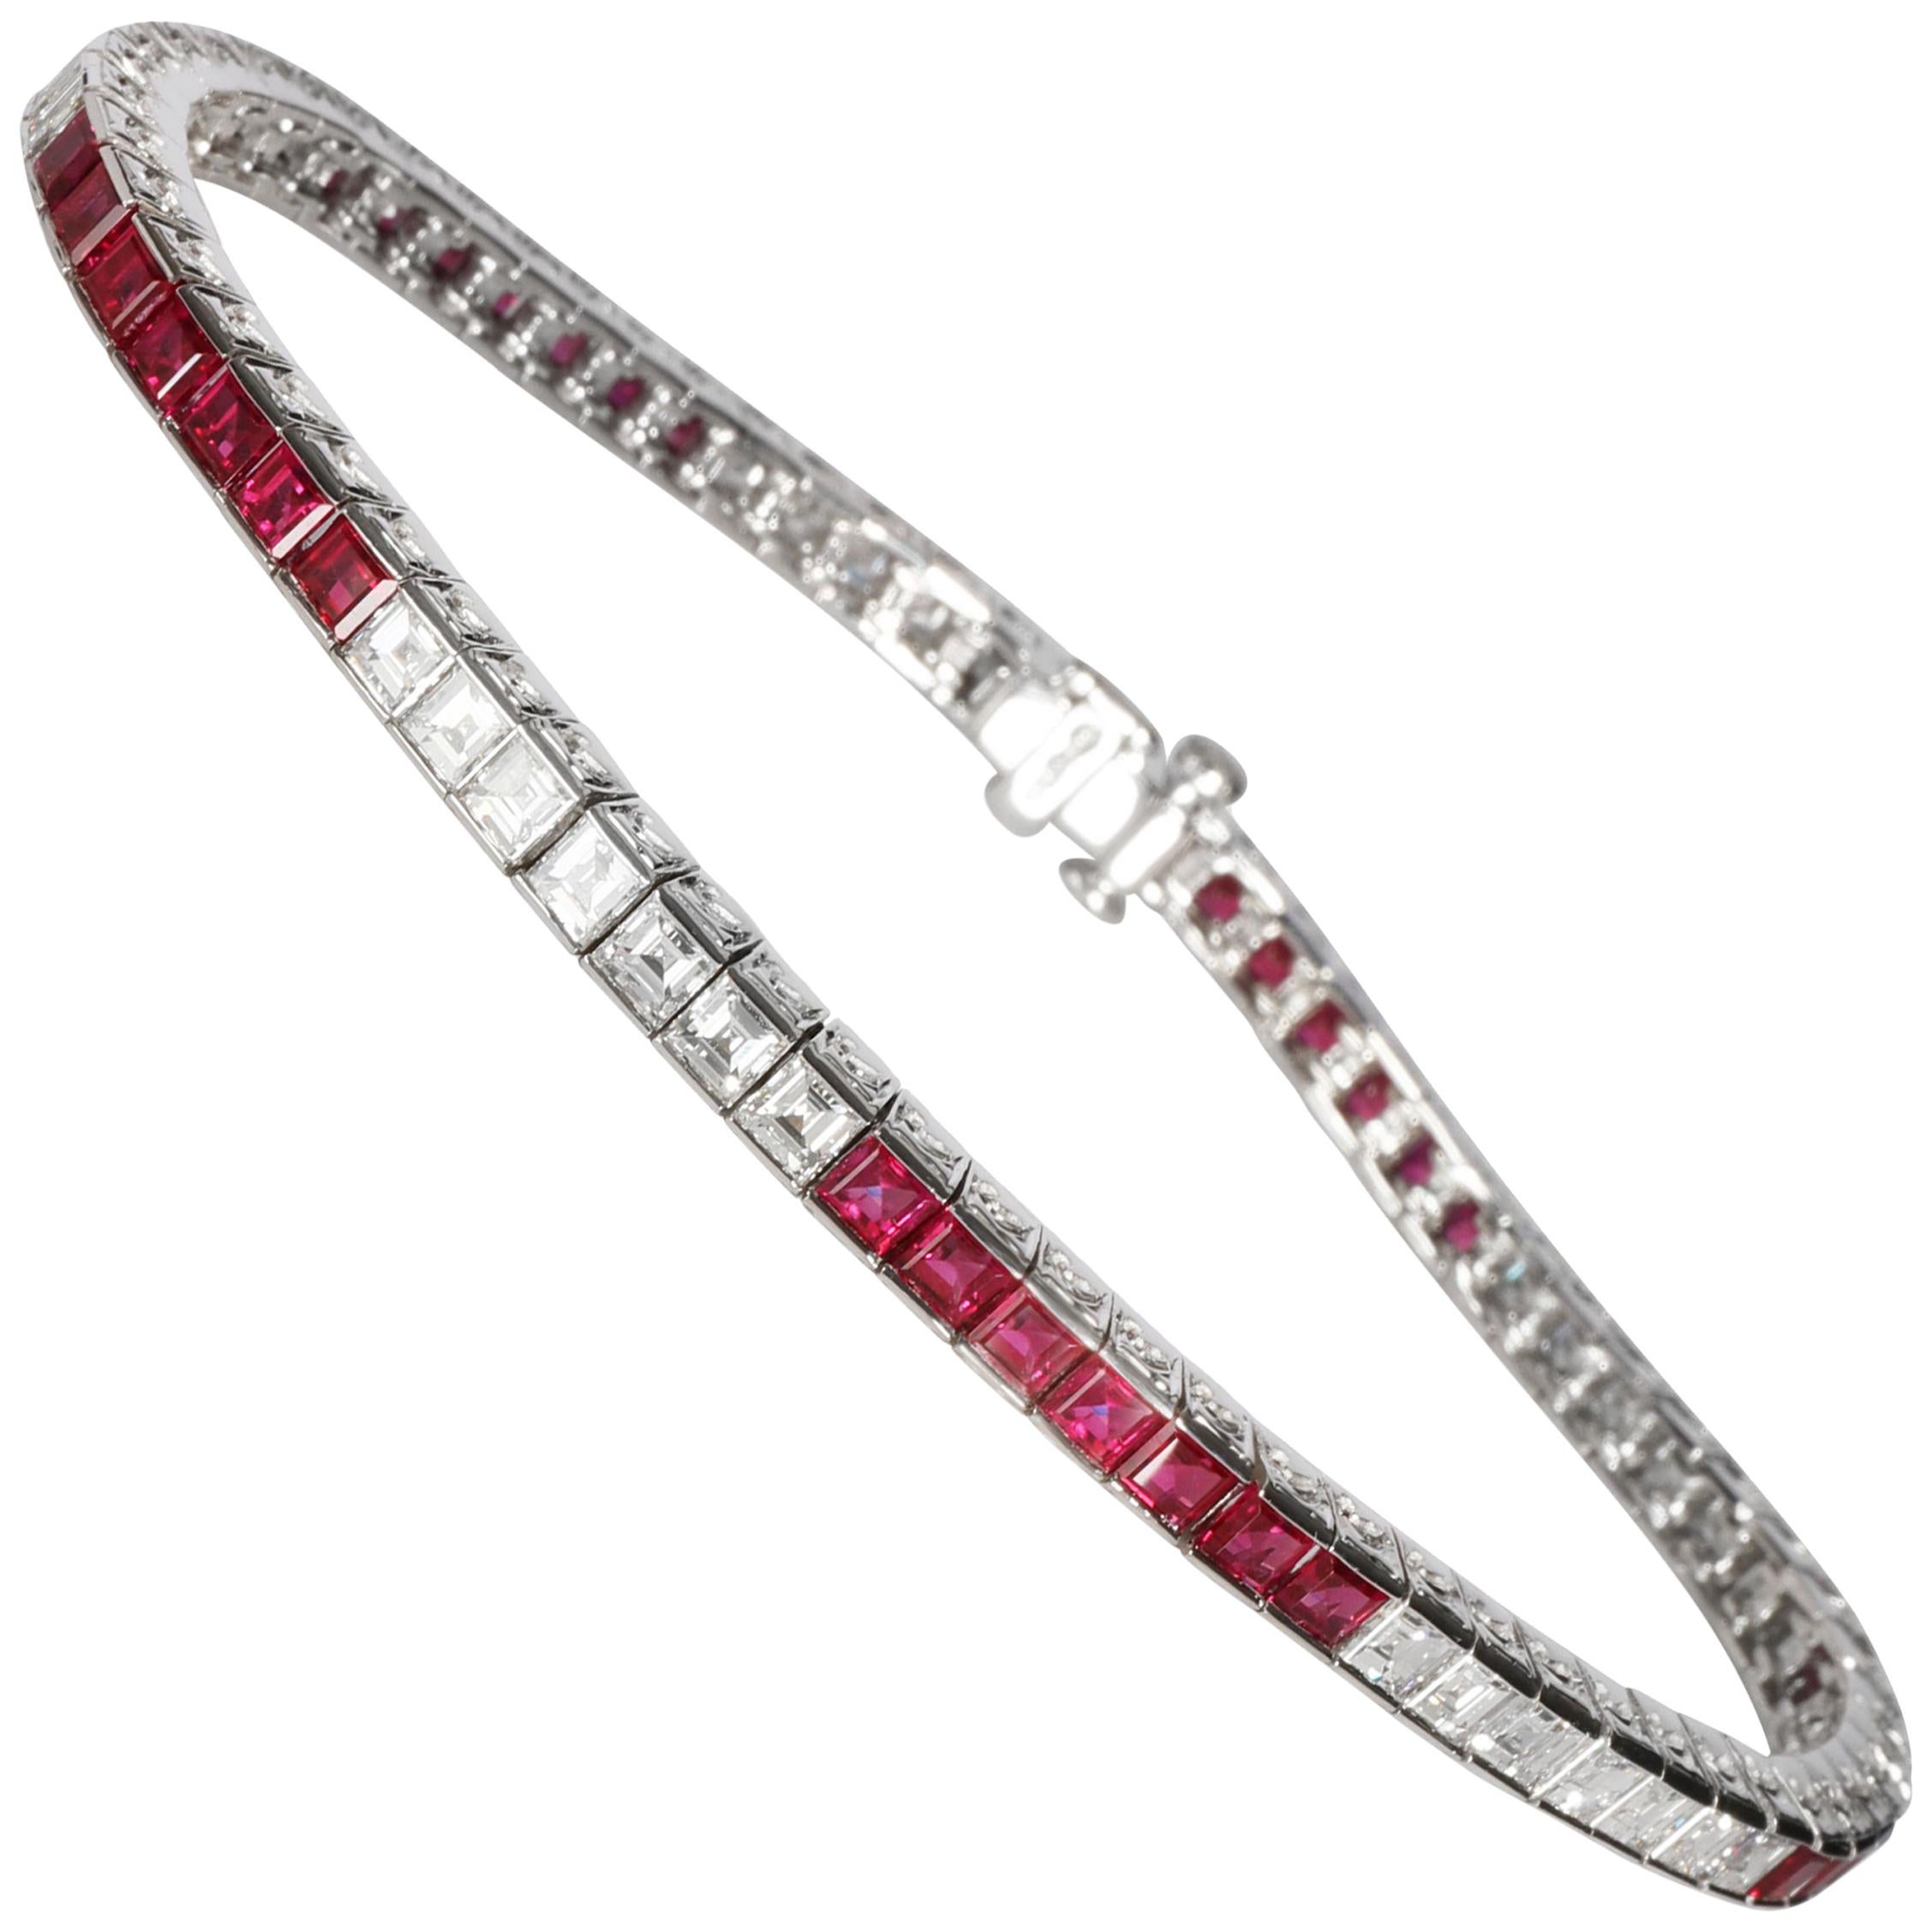 Tiffany & Co. Ruby and Diamond Channel Bracelet in Platinum 3.50 Carat